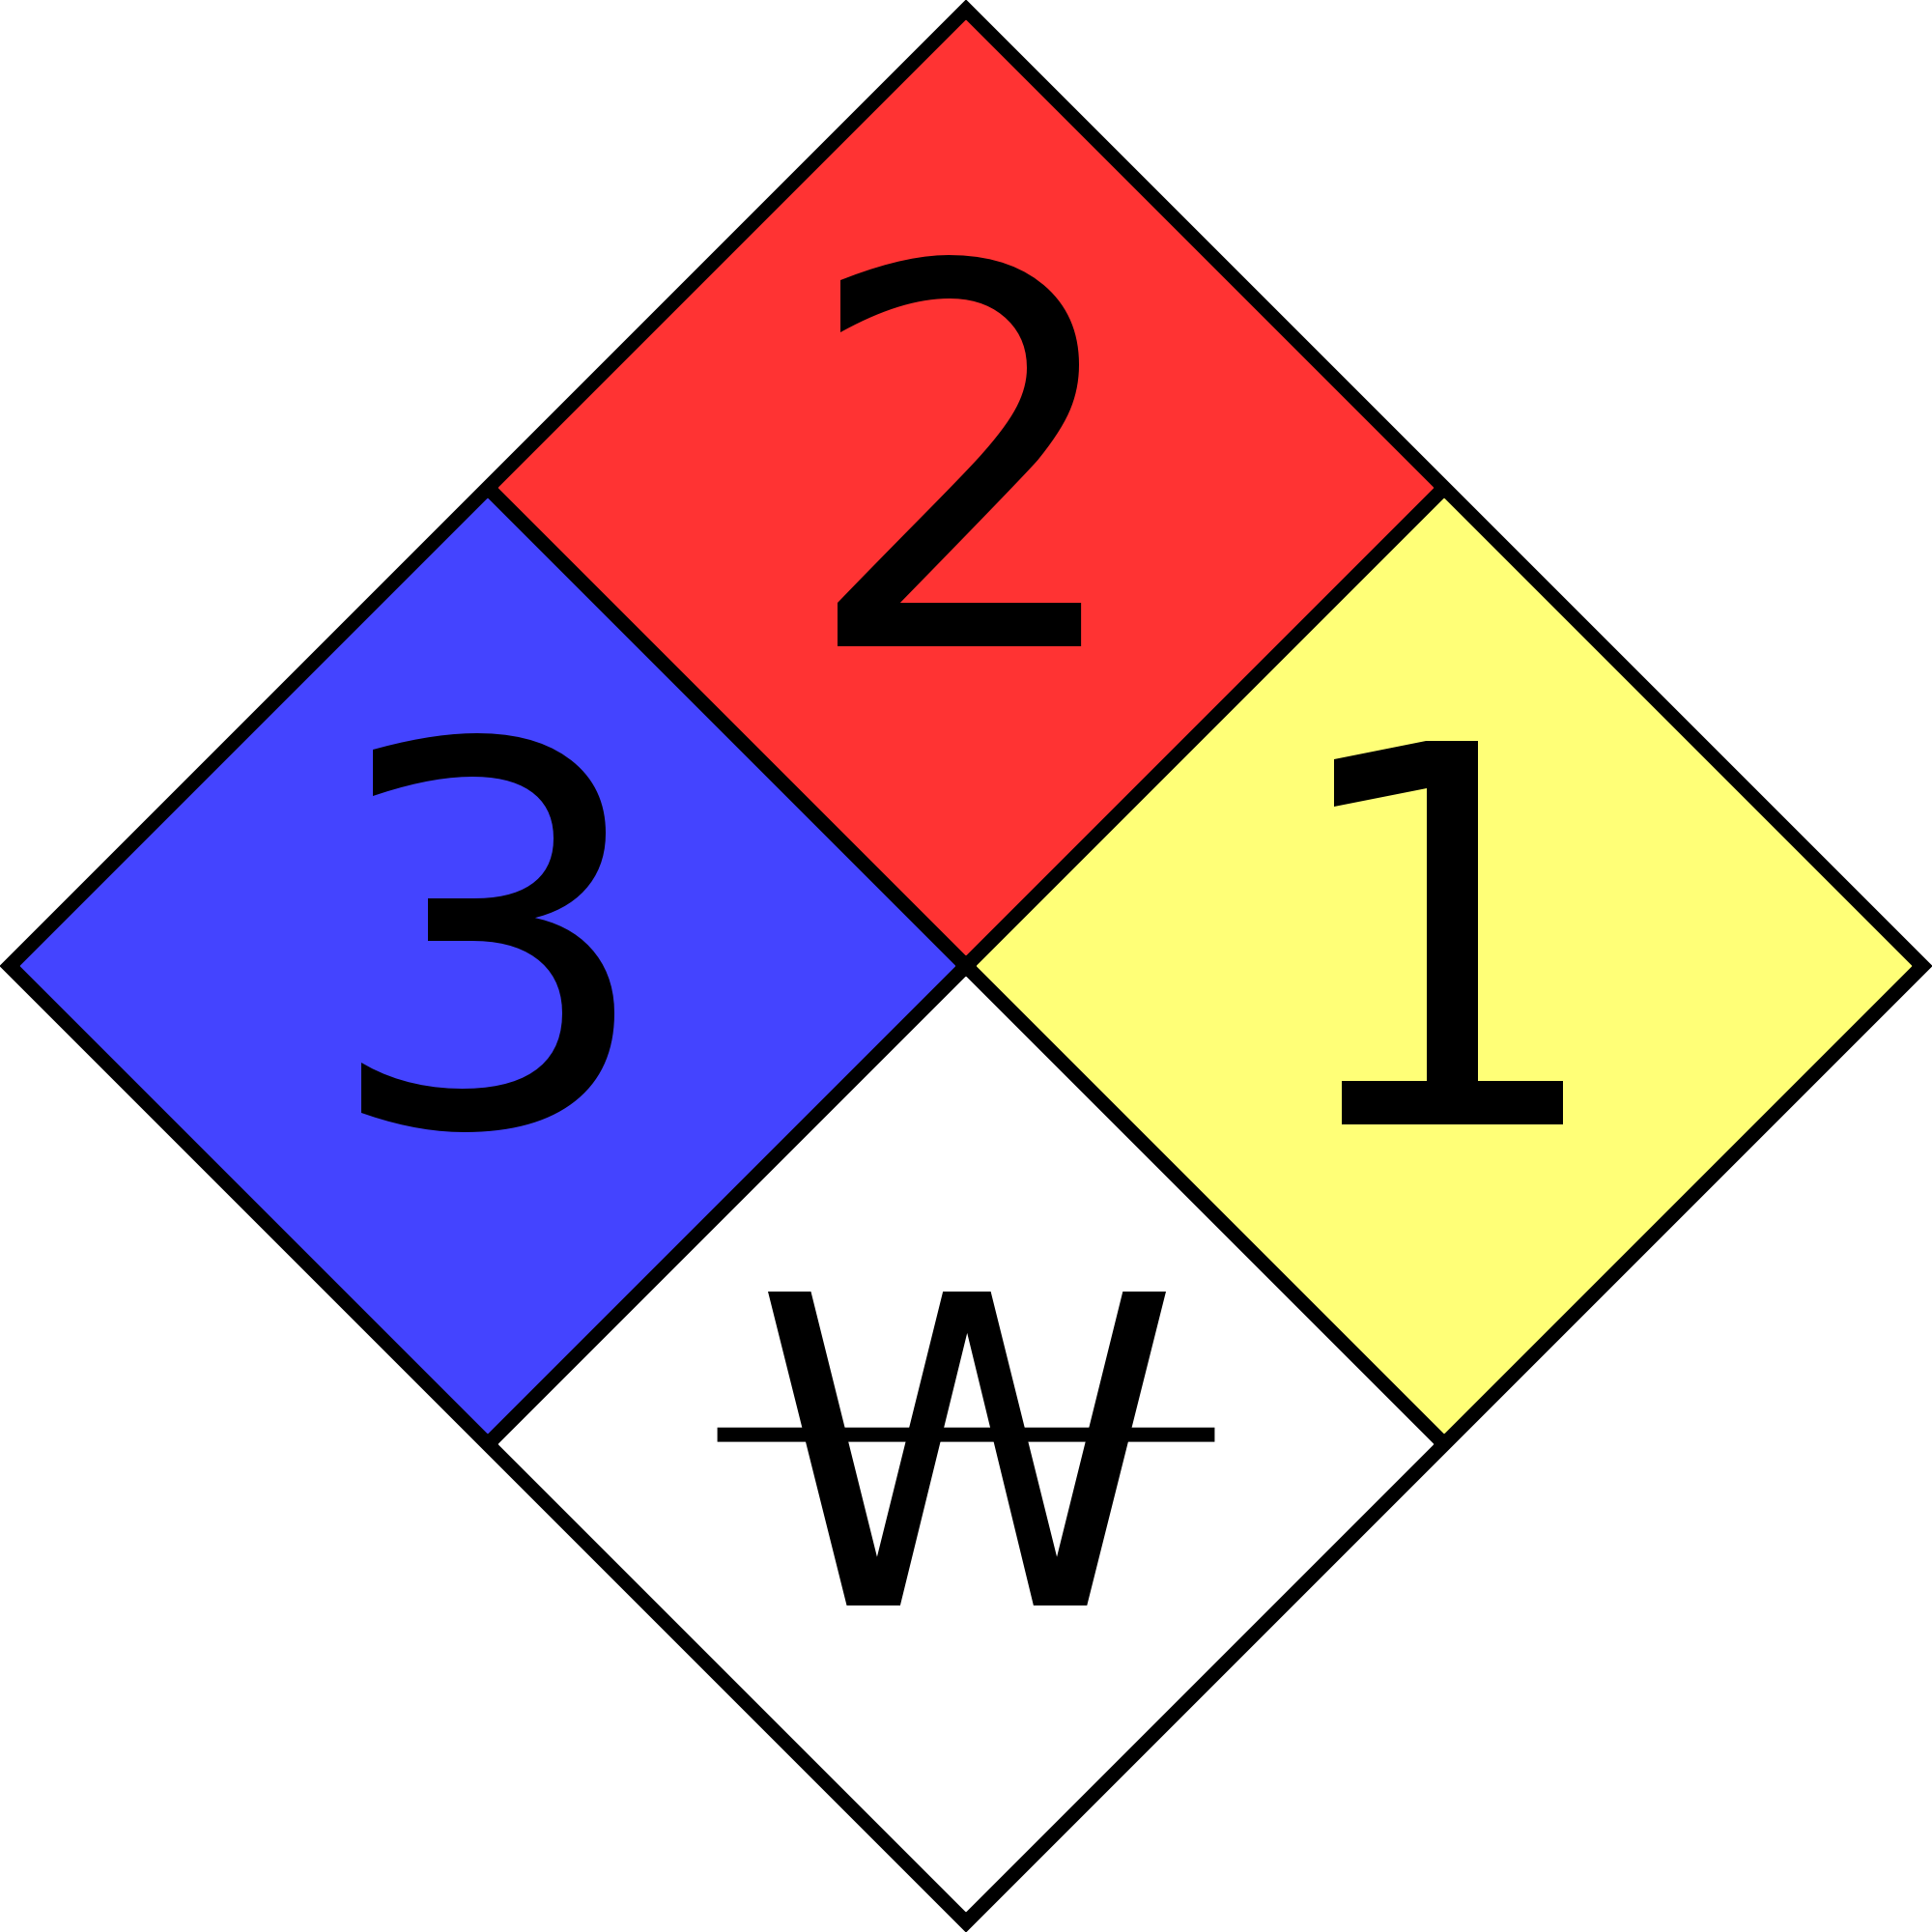 NFPA 704 – Chemical Marking and Fire Diamond